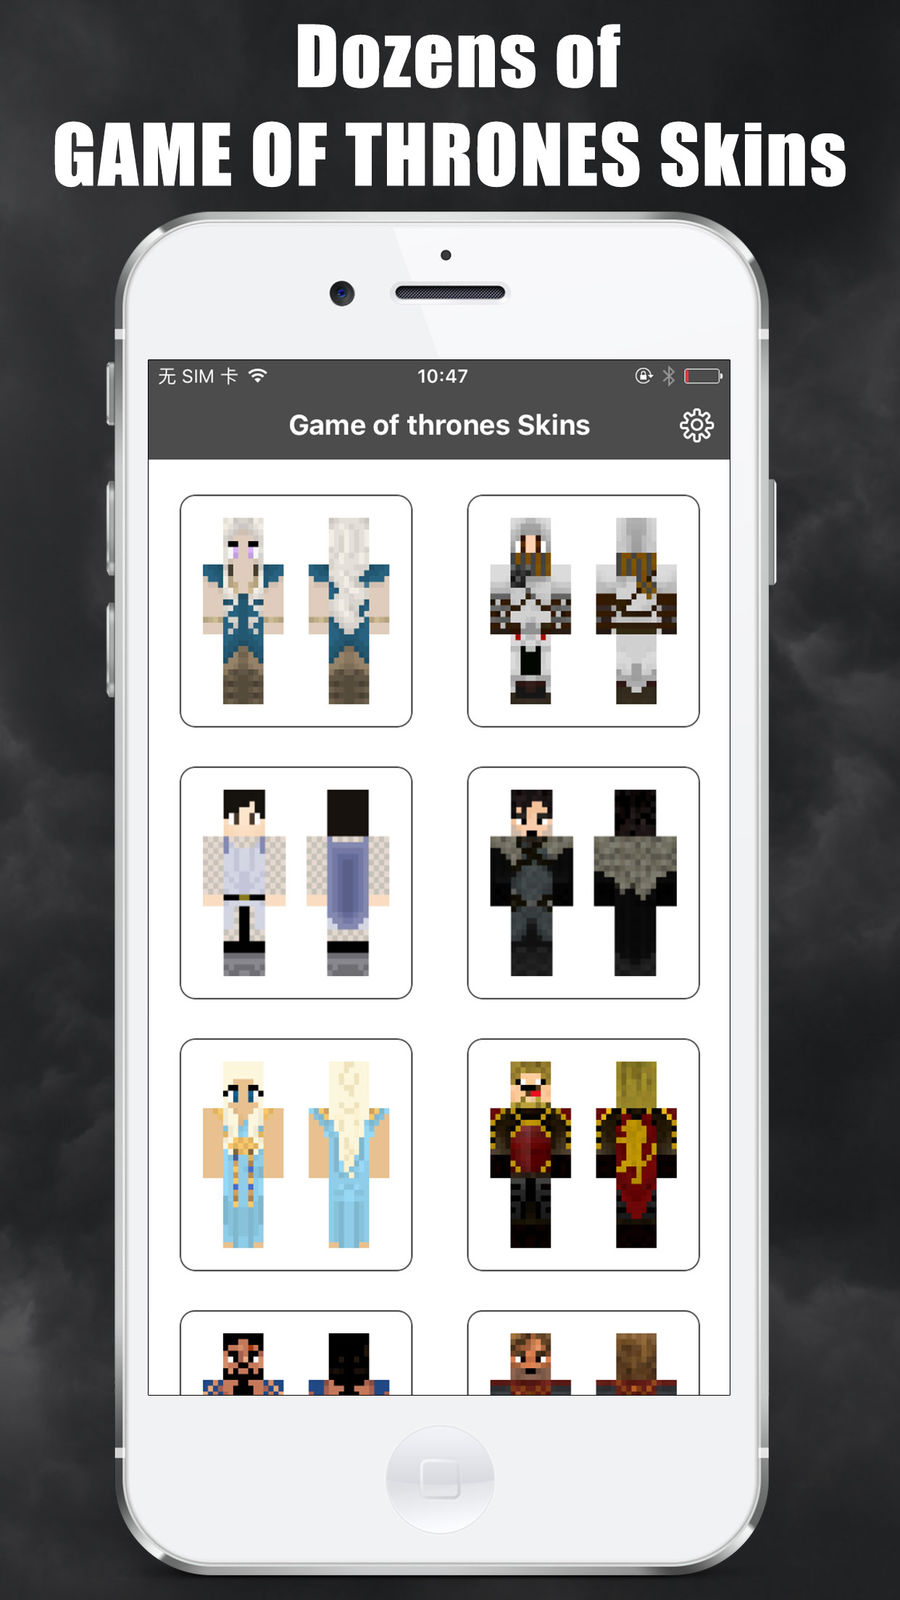 game of thrones enhanced edition free download